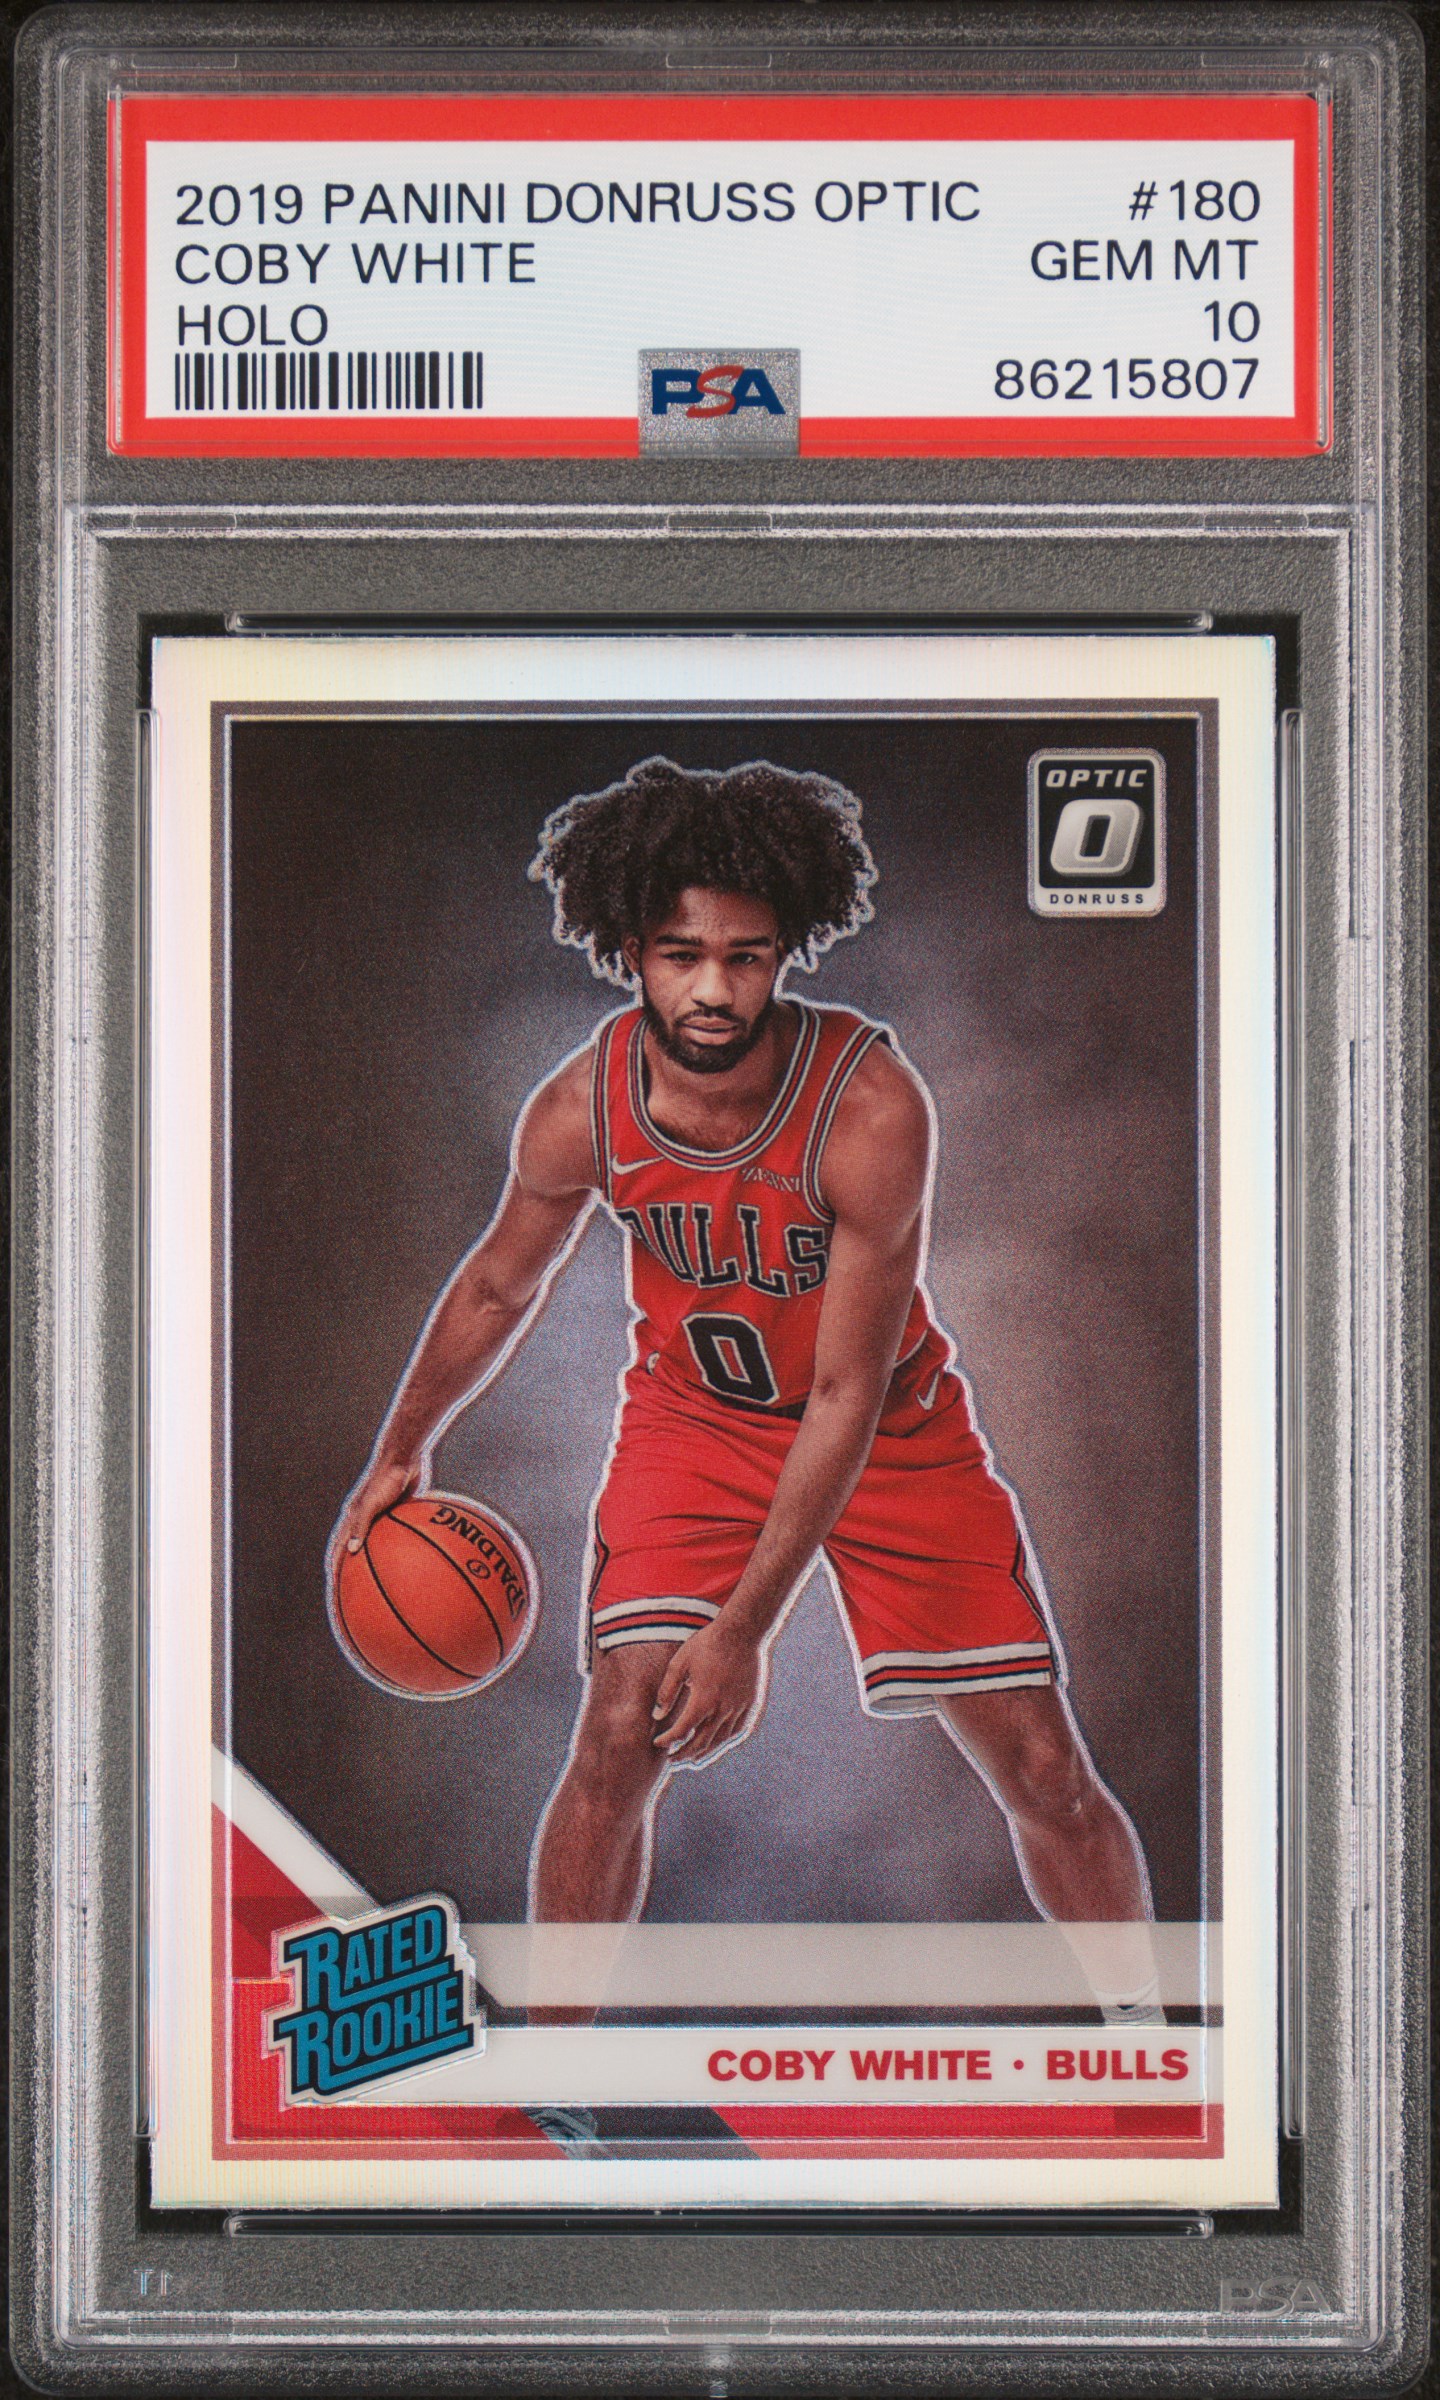 2019-20 Panini Donruss Optic Holo Rated Rookie #180 Coby White Rookie Card – PSA GEM MT 10